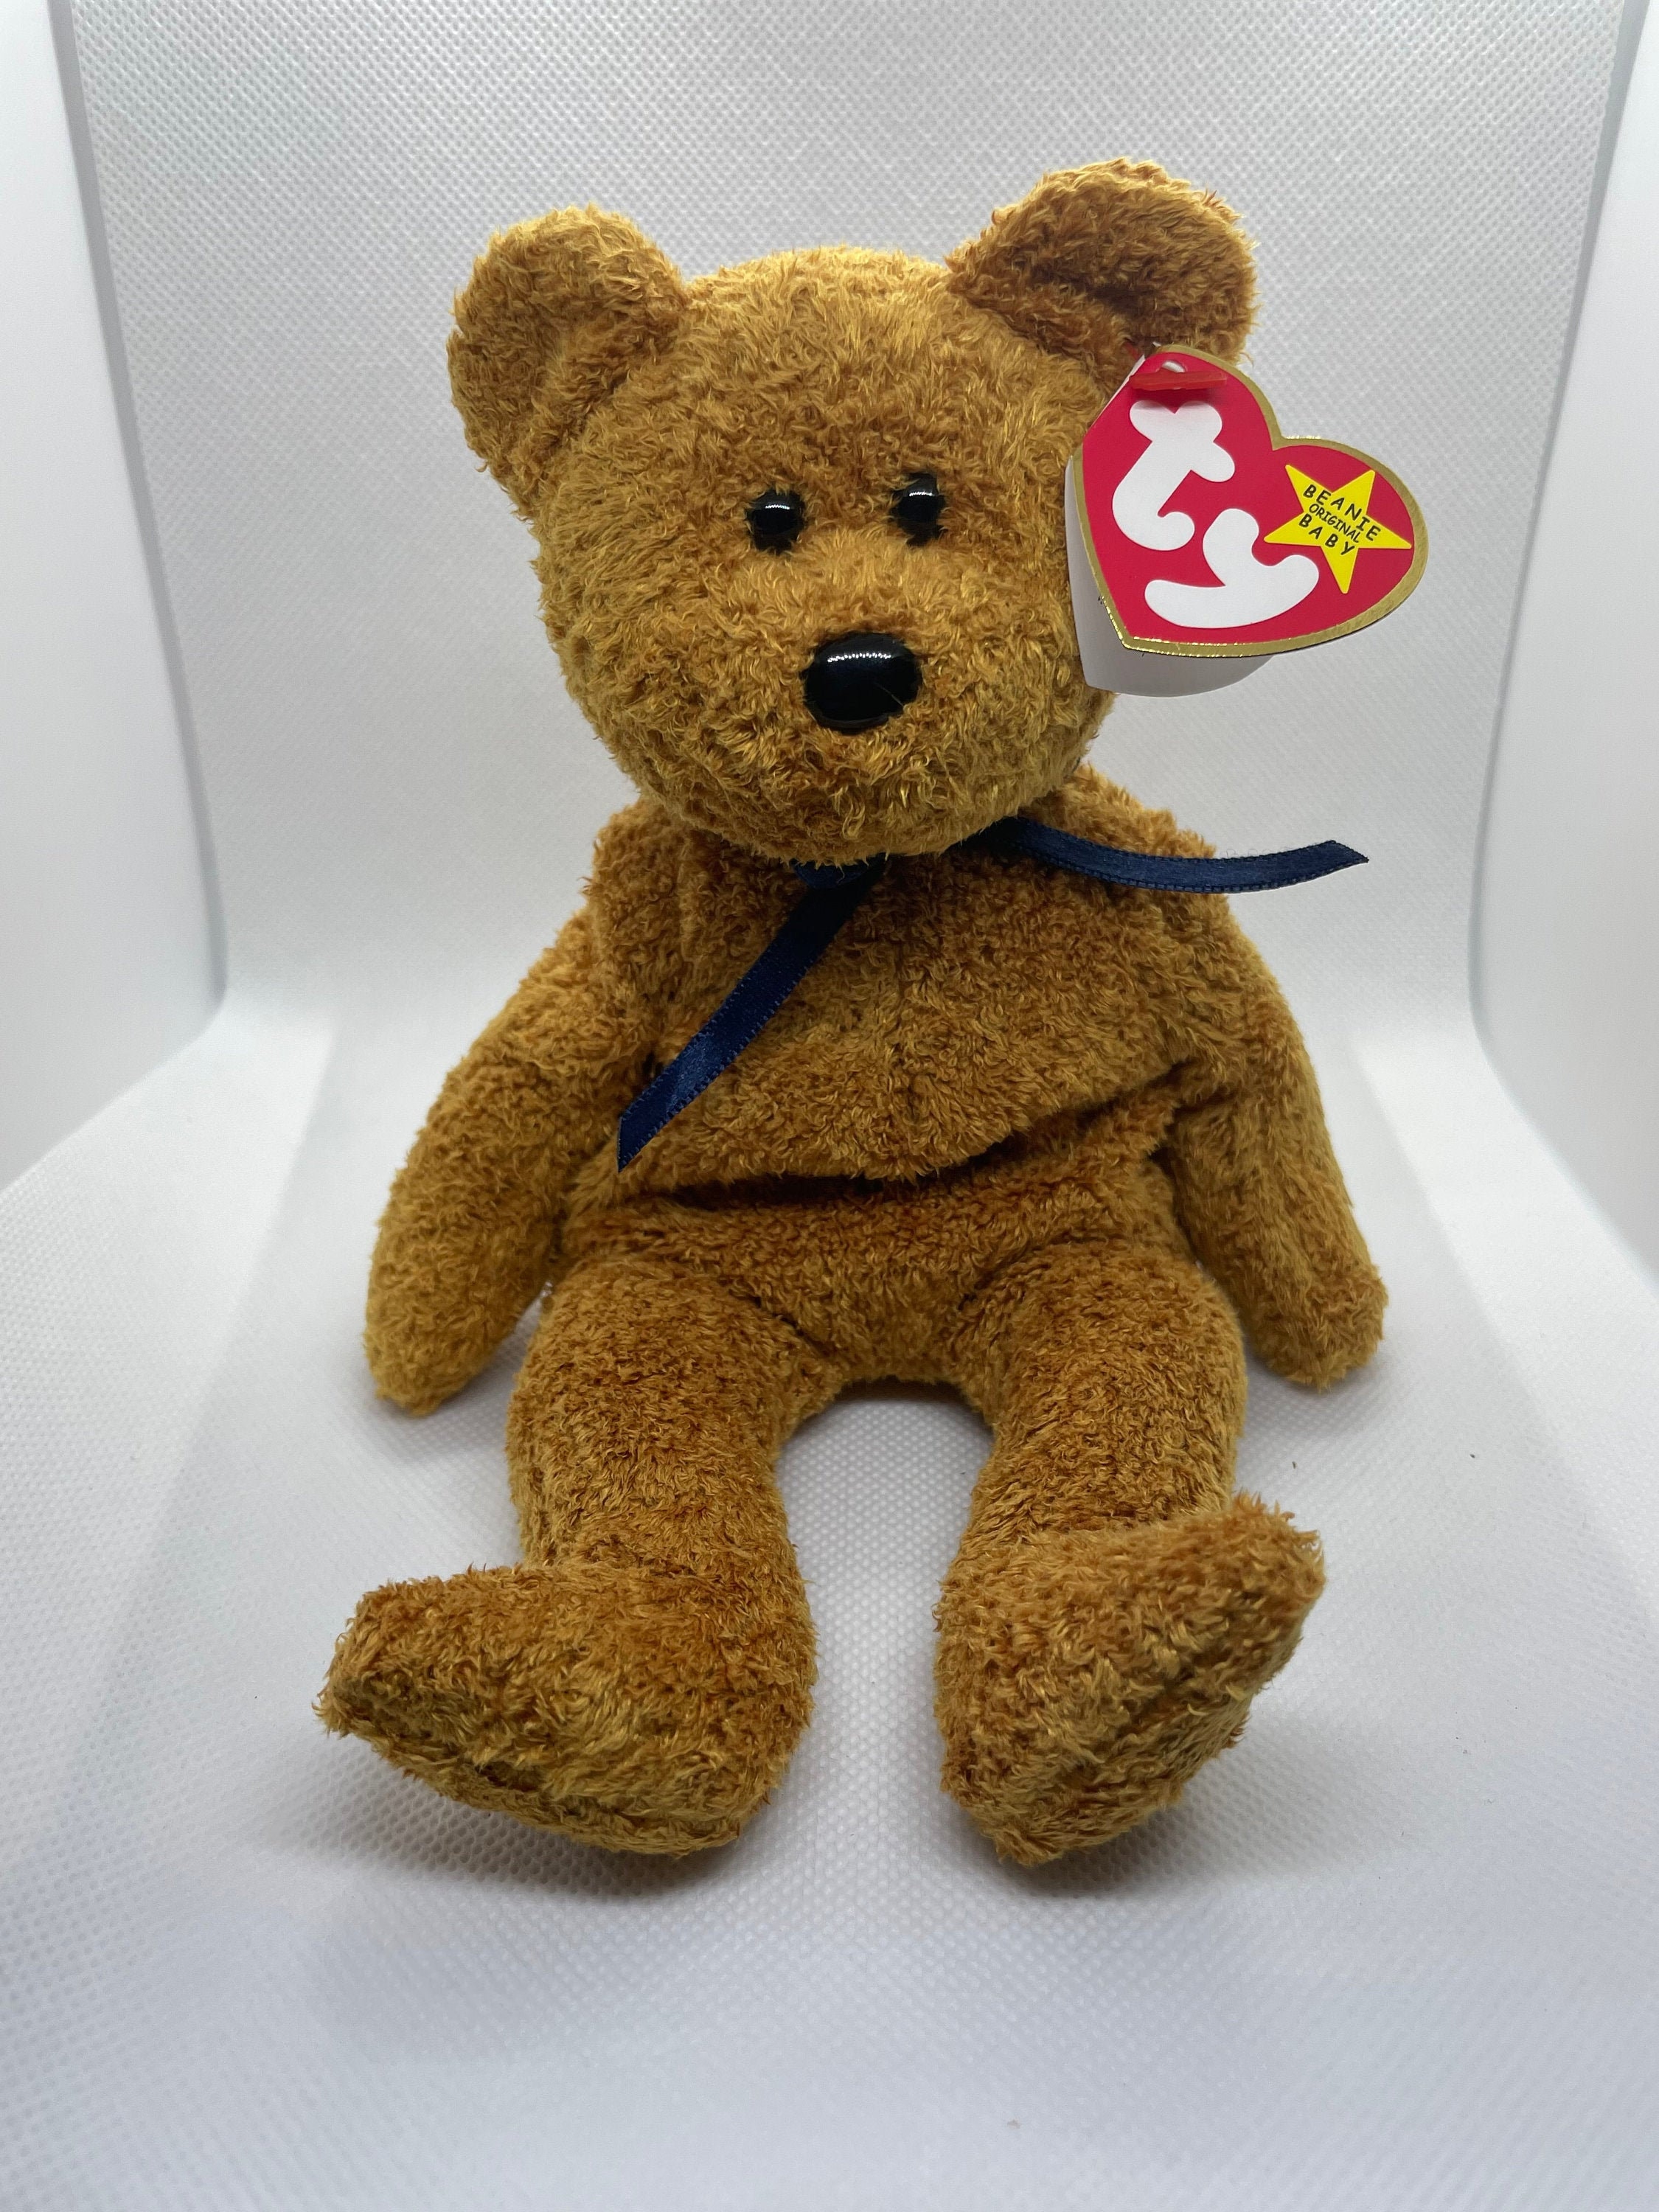 Old Face Teddy Prototype Set: Ribbons & Noses! Original 6 – Rarest